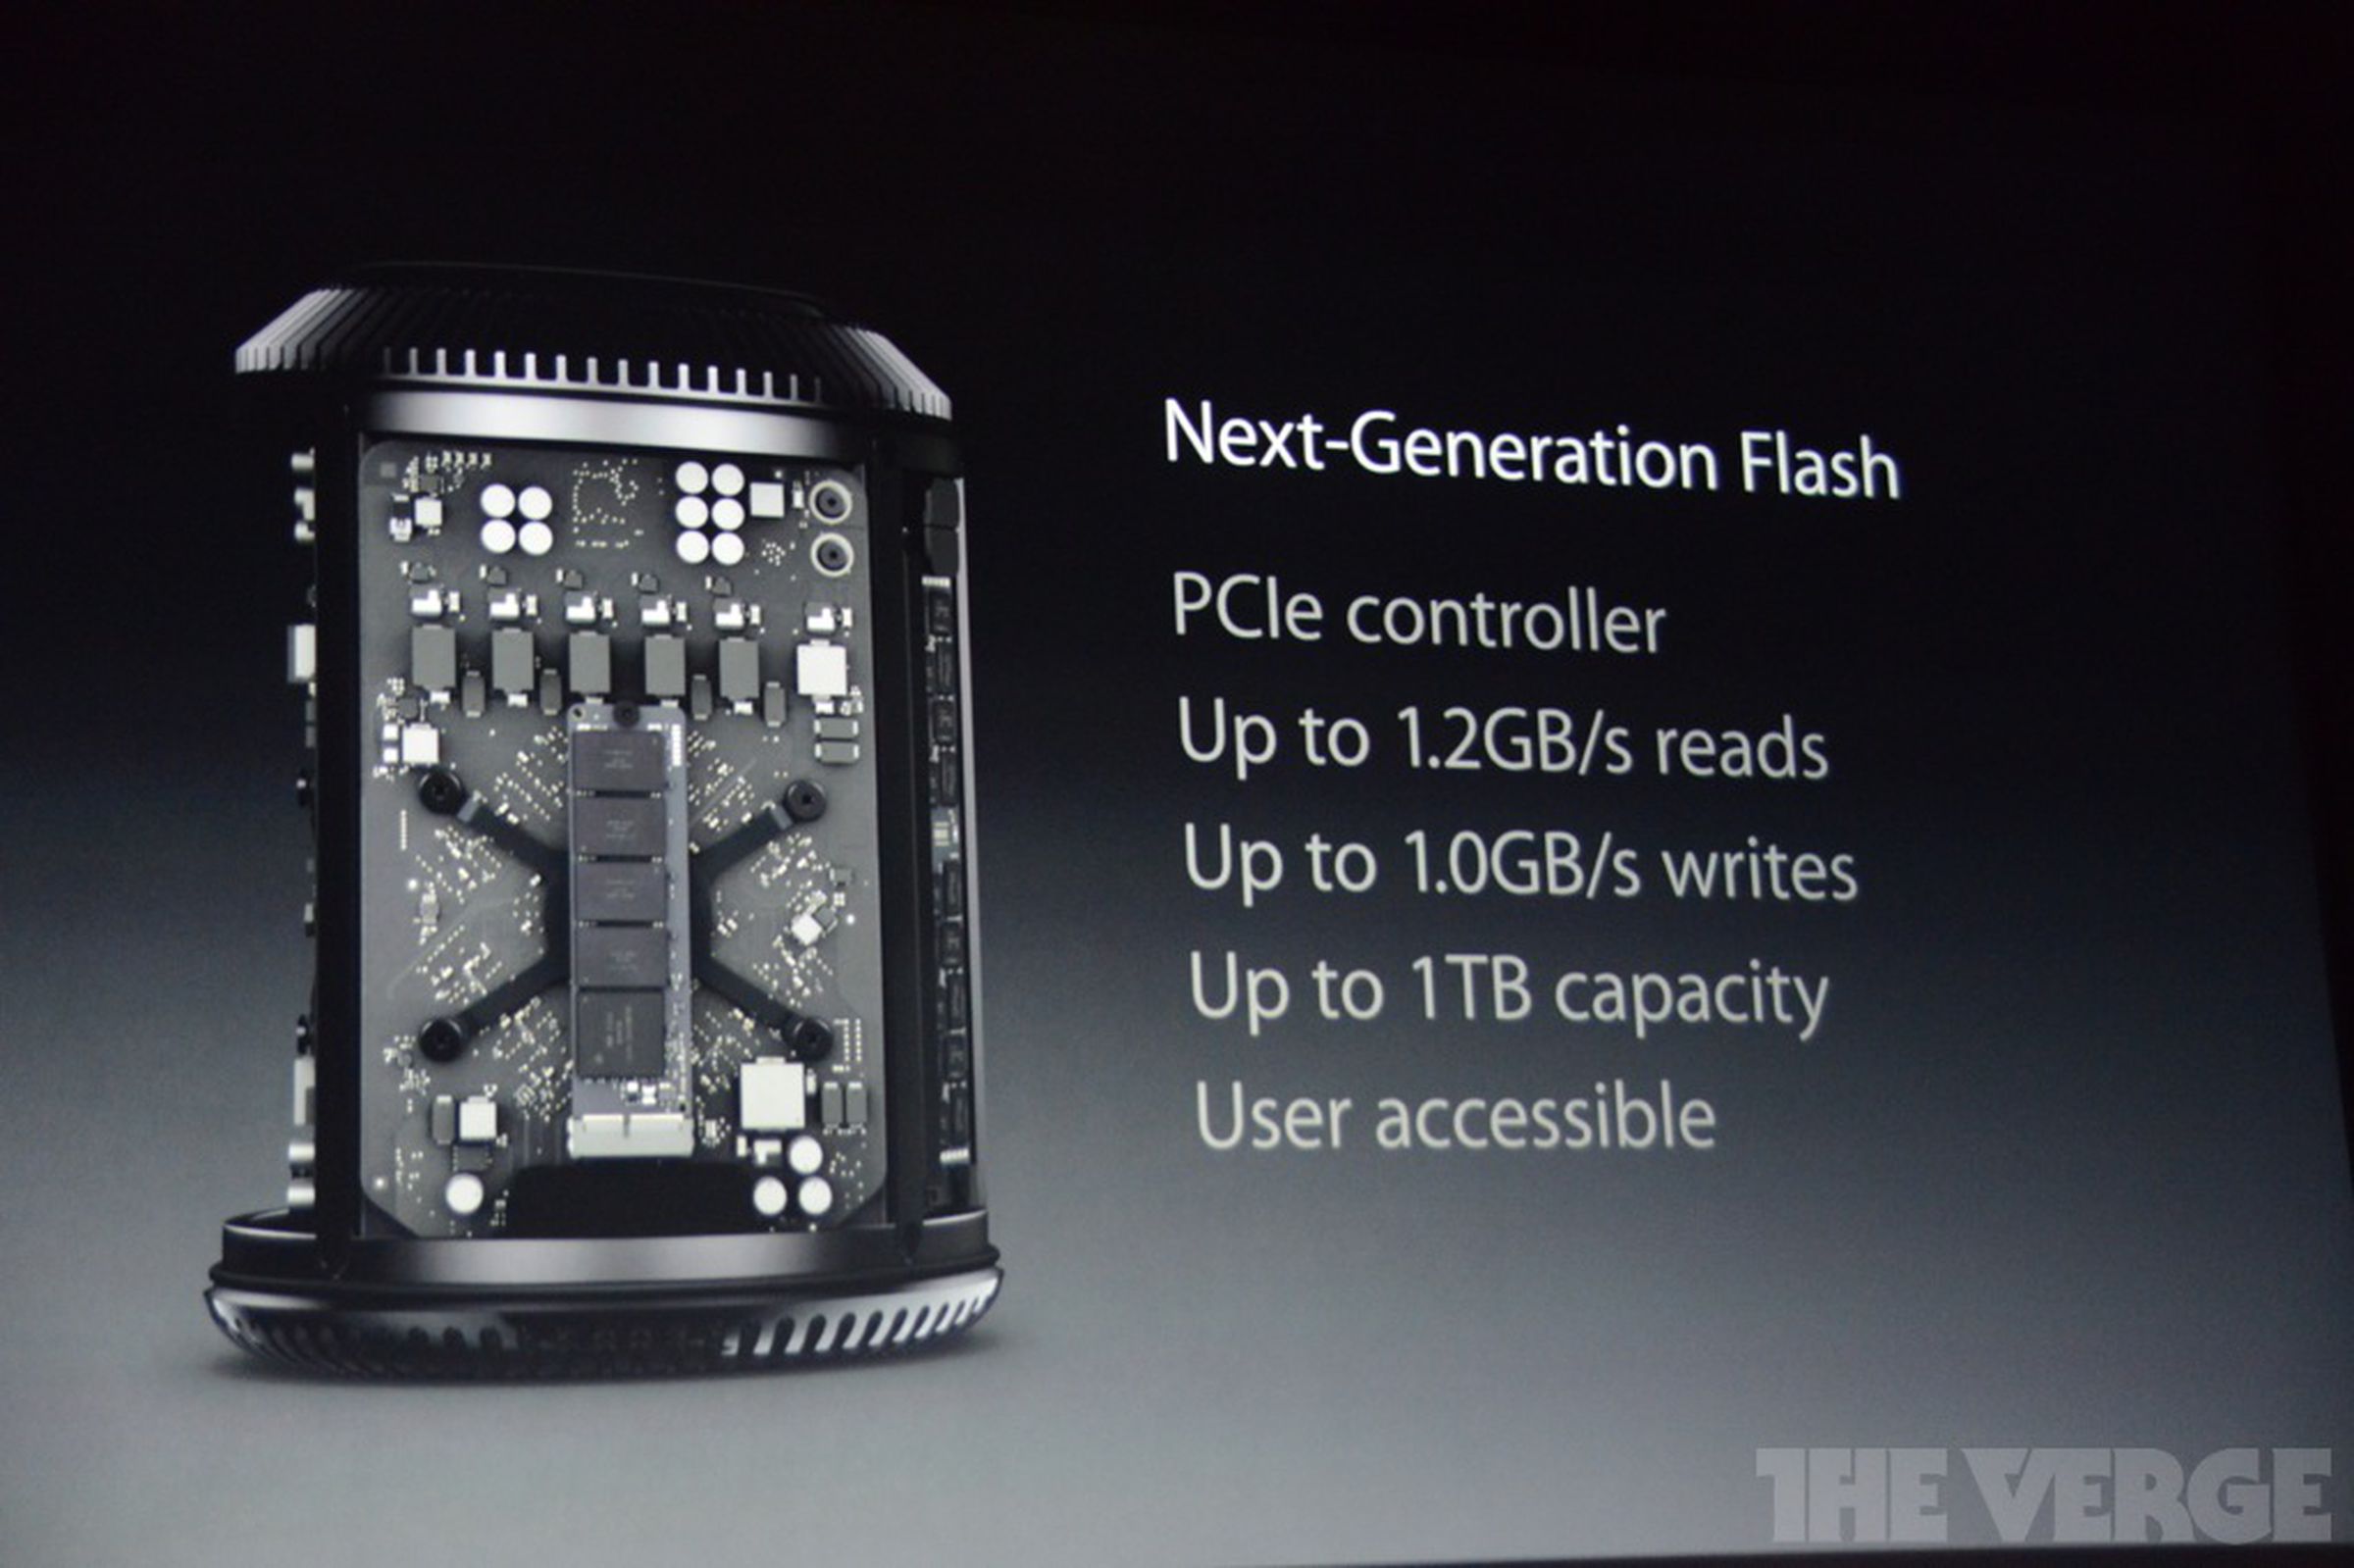 Photos of the new Mac Pro from Apple's 2013 fall event